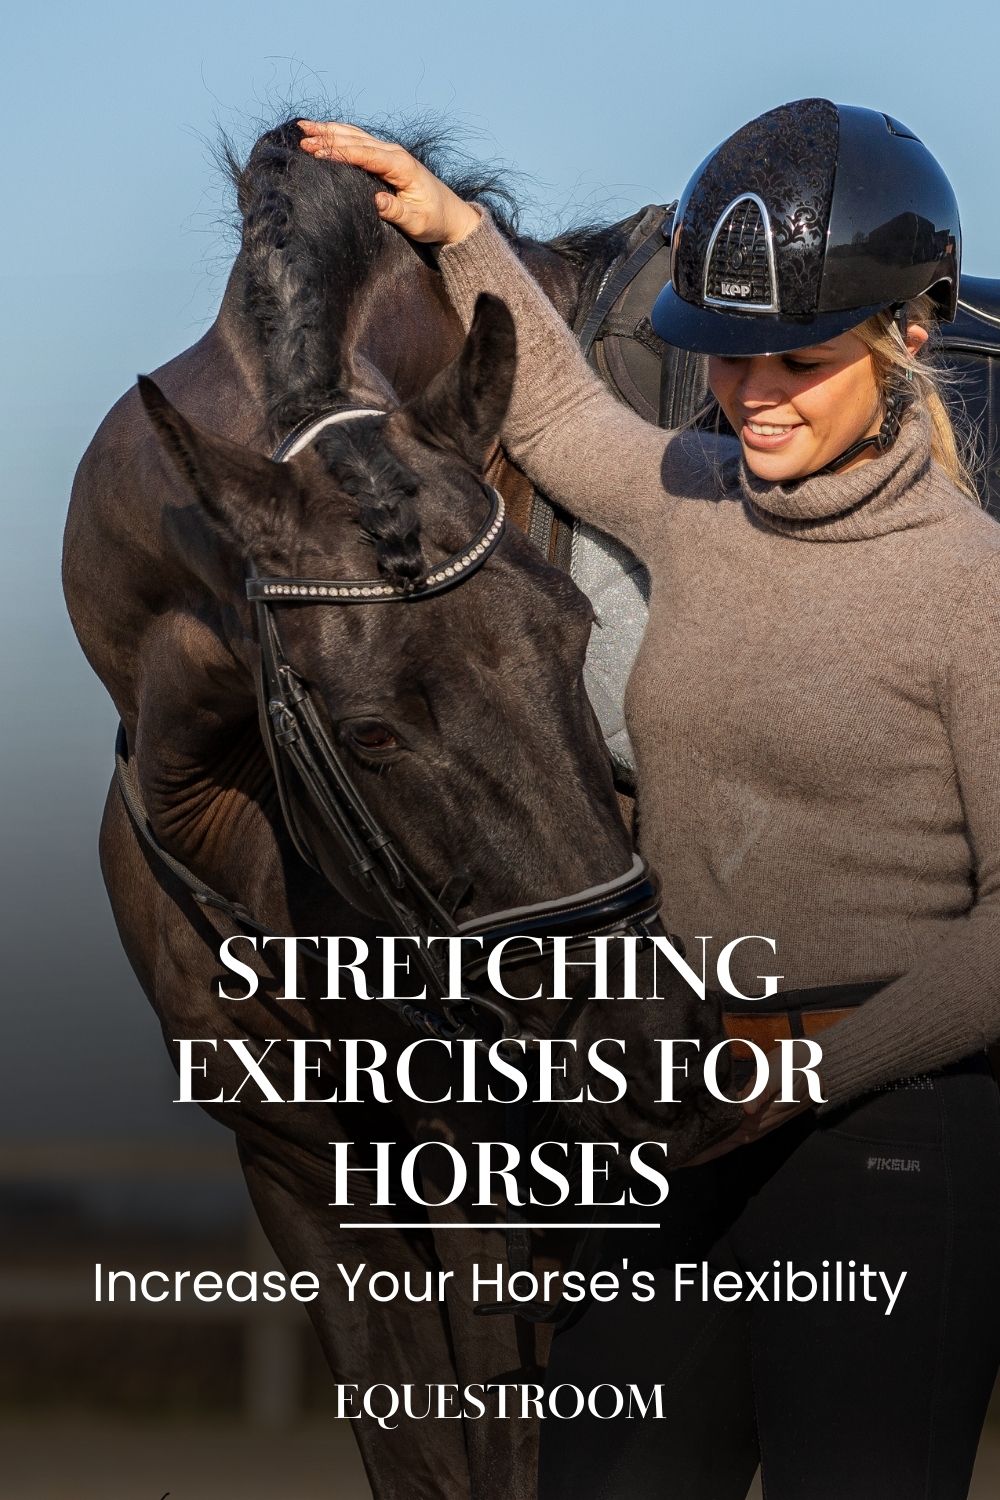 STRETCHING EXERCISES FOR HORSES